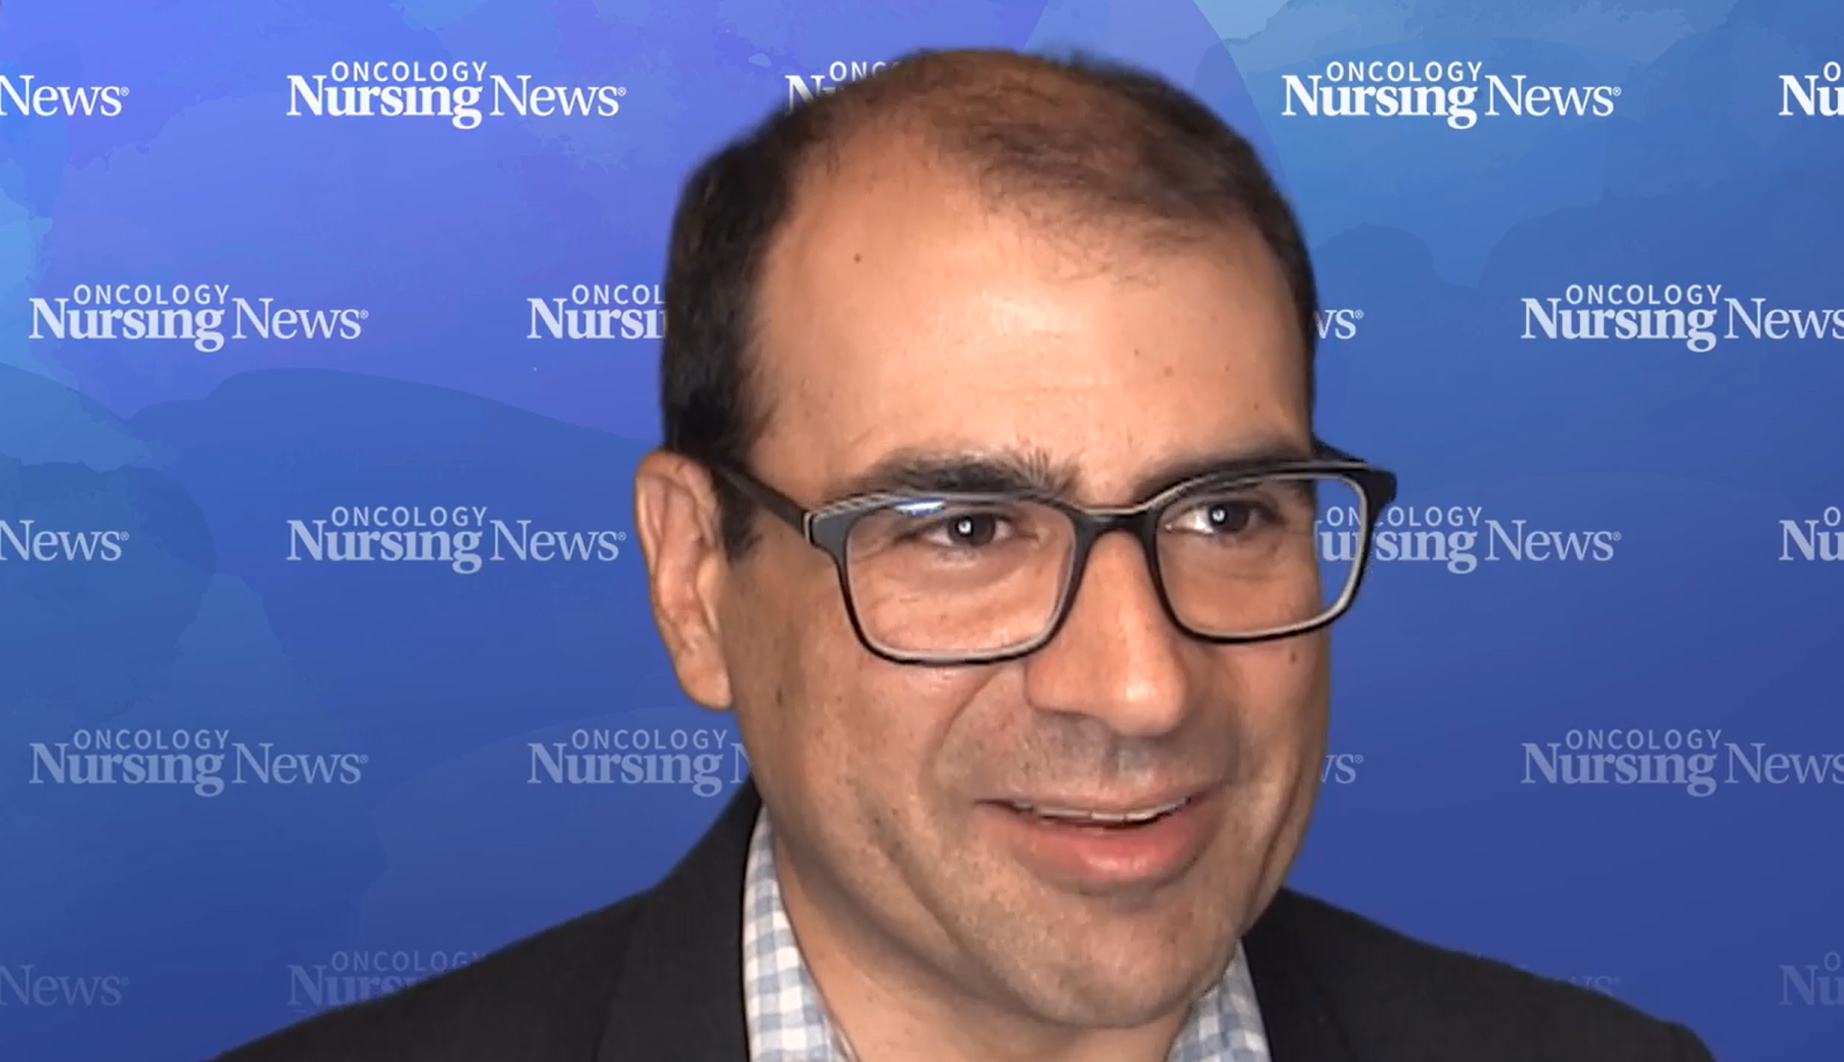 Long-Term Data Support Teclistamab in Relapsed, Refractory Myeloma